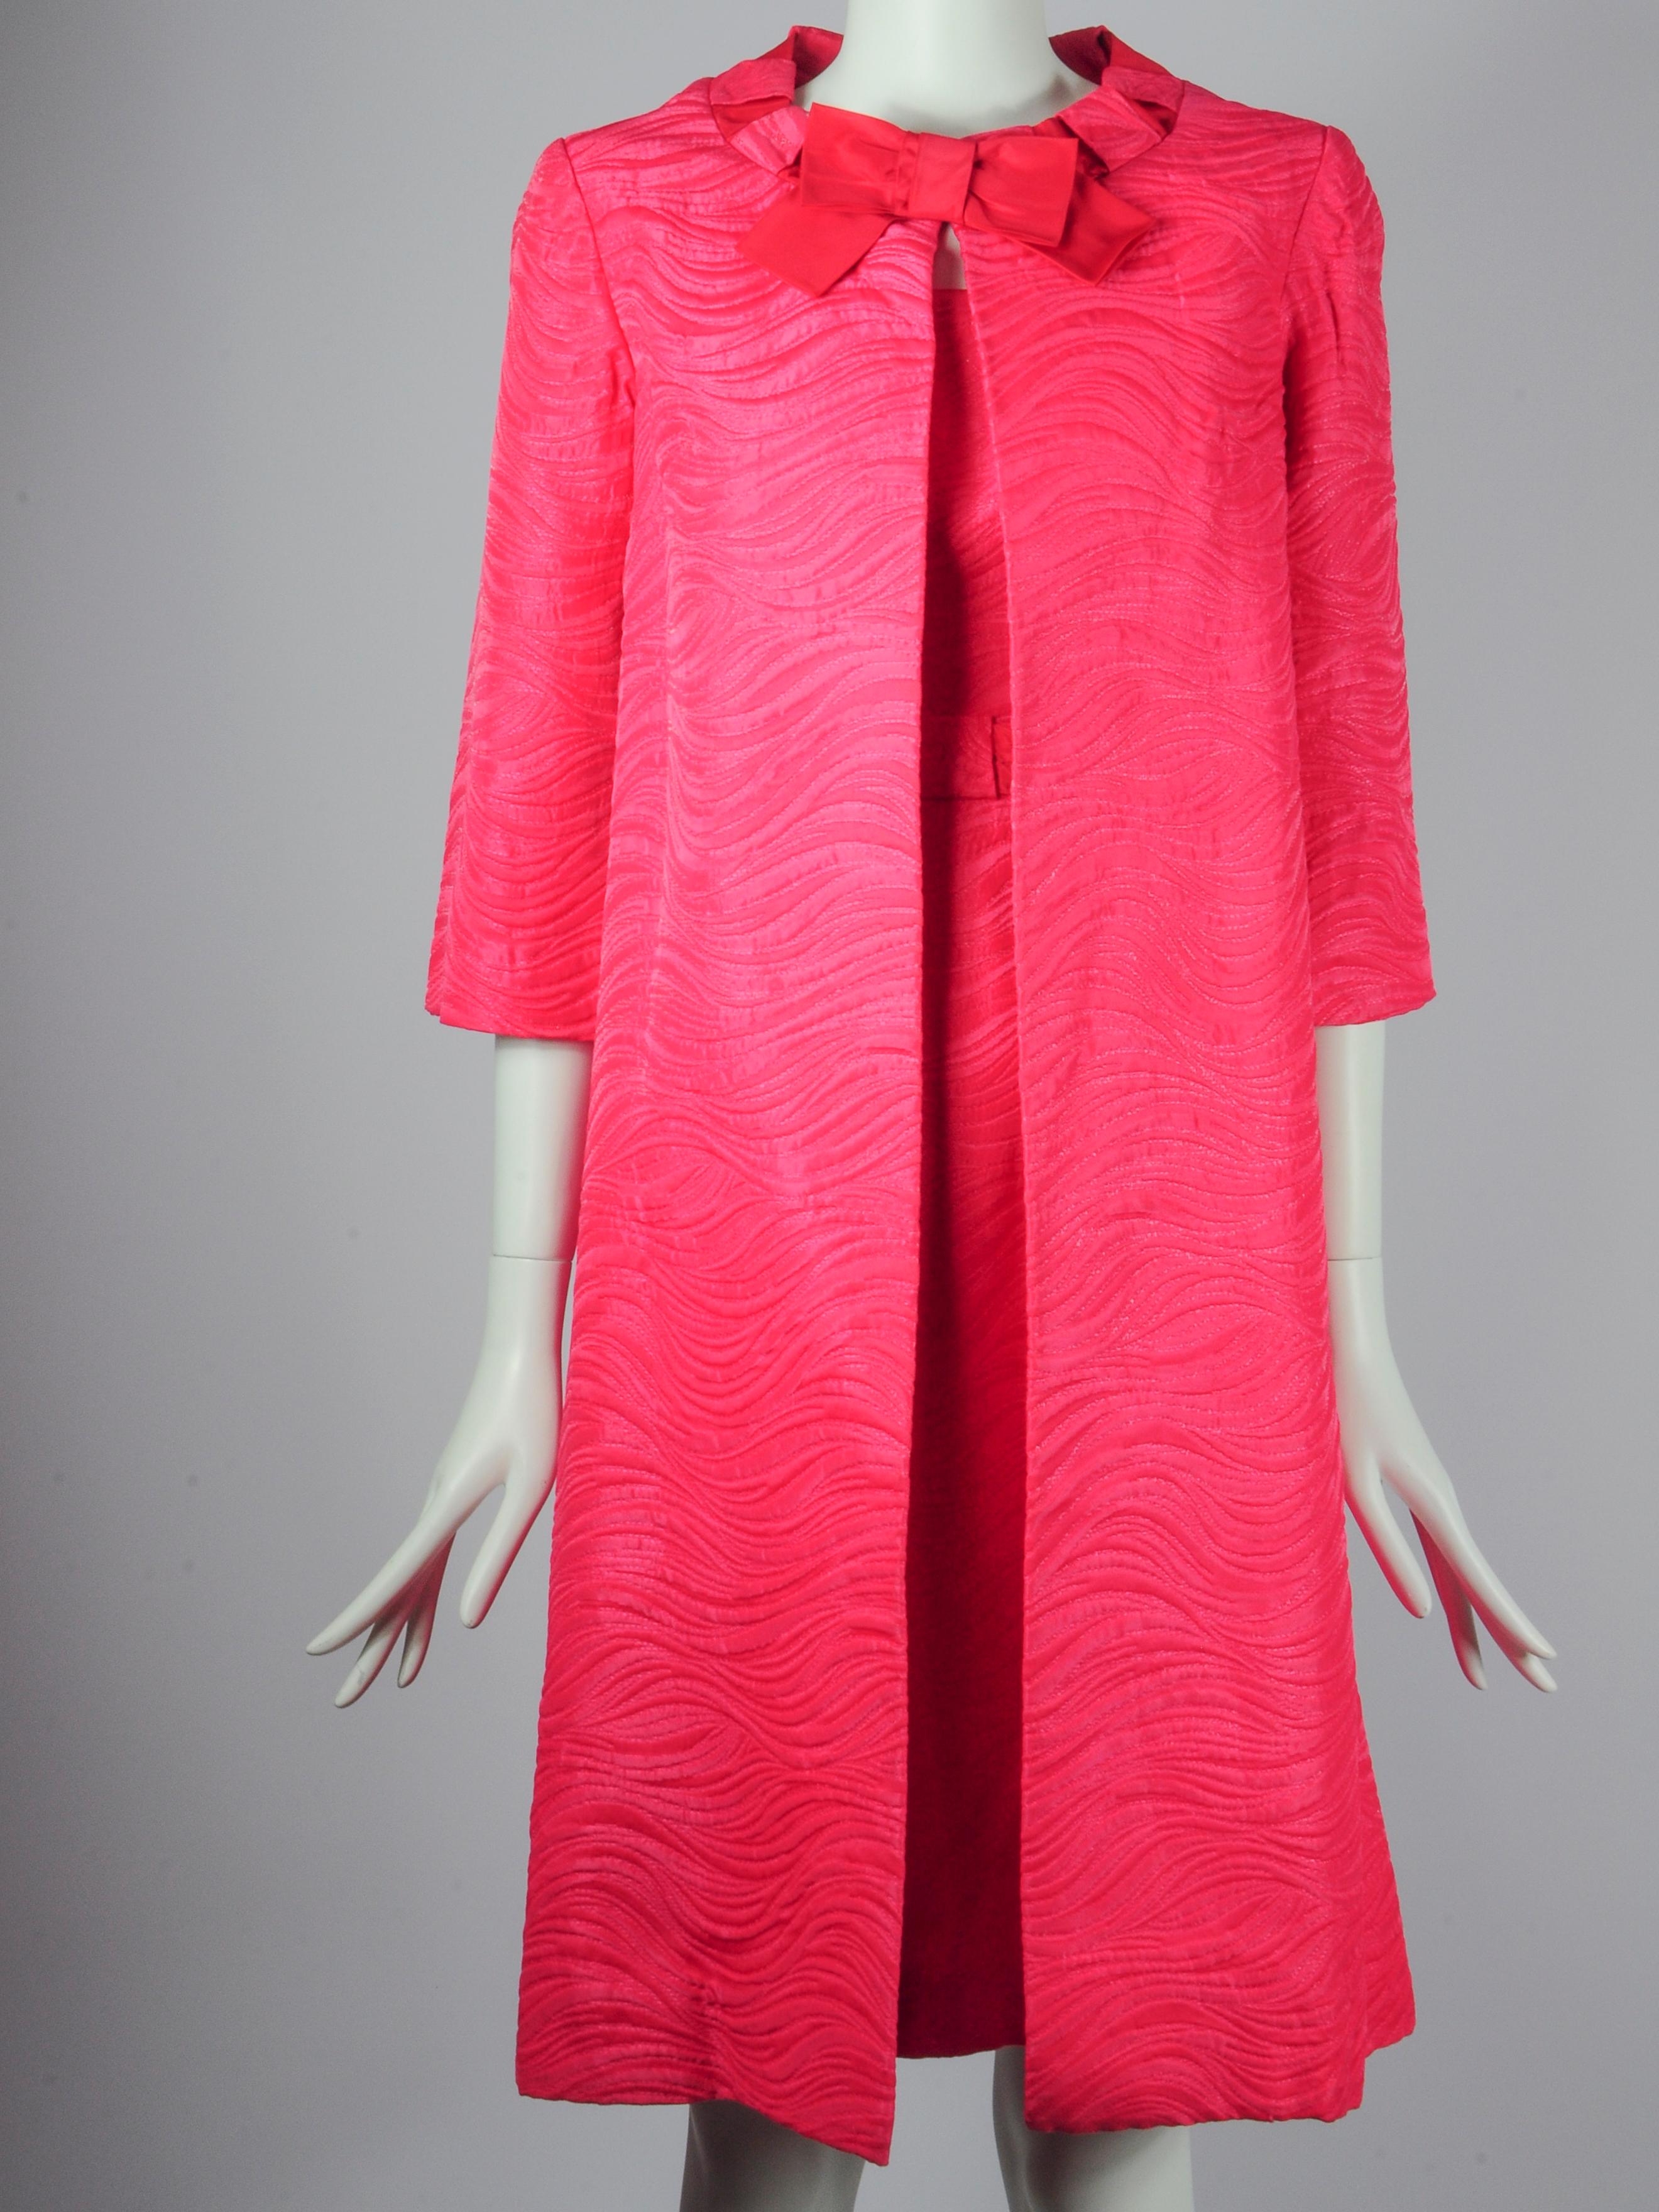 Jean Allen London Dress and Jacket Two Piece Set in Fuchsia Pink with Bow Detail For Sale 9